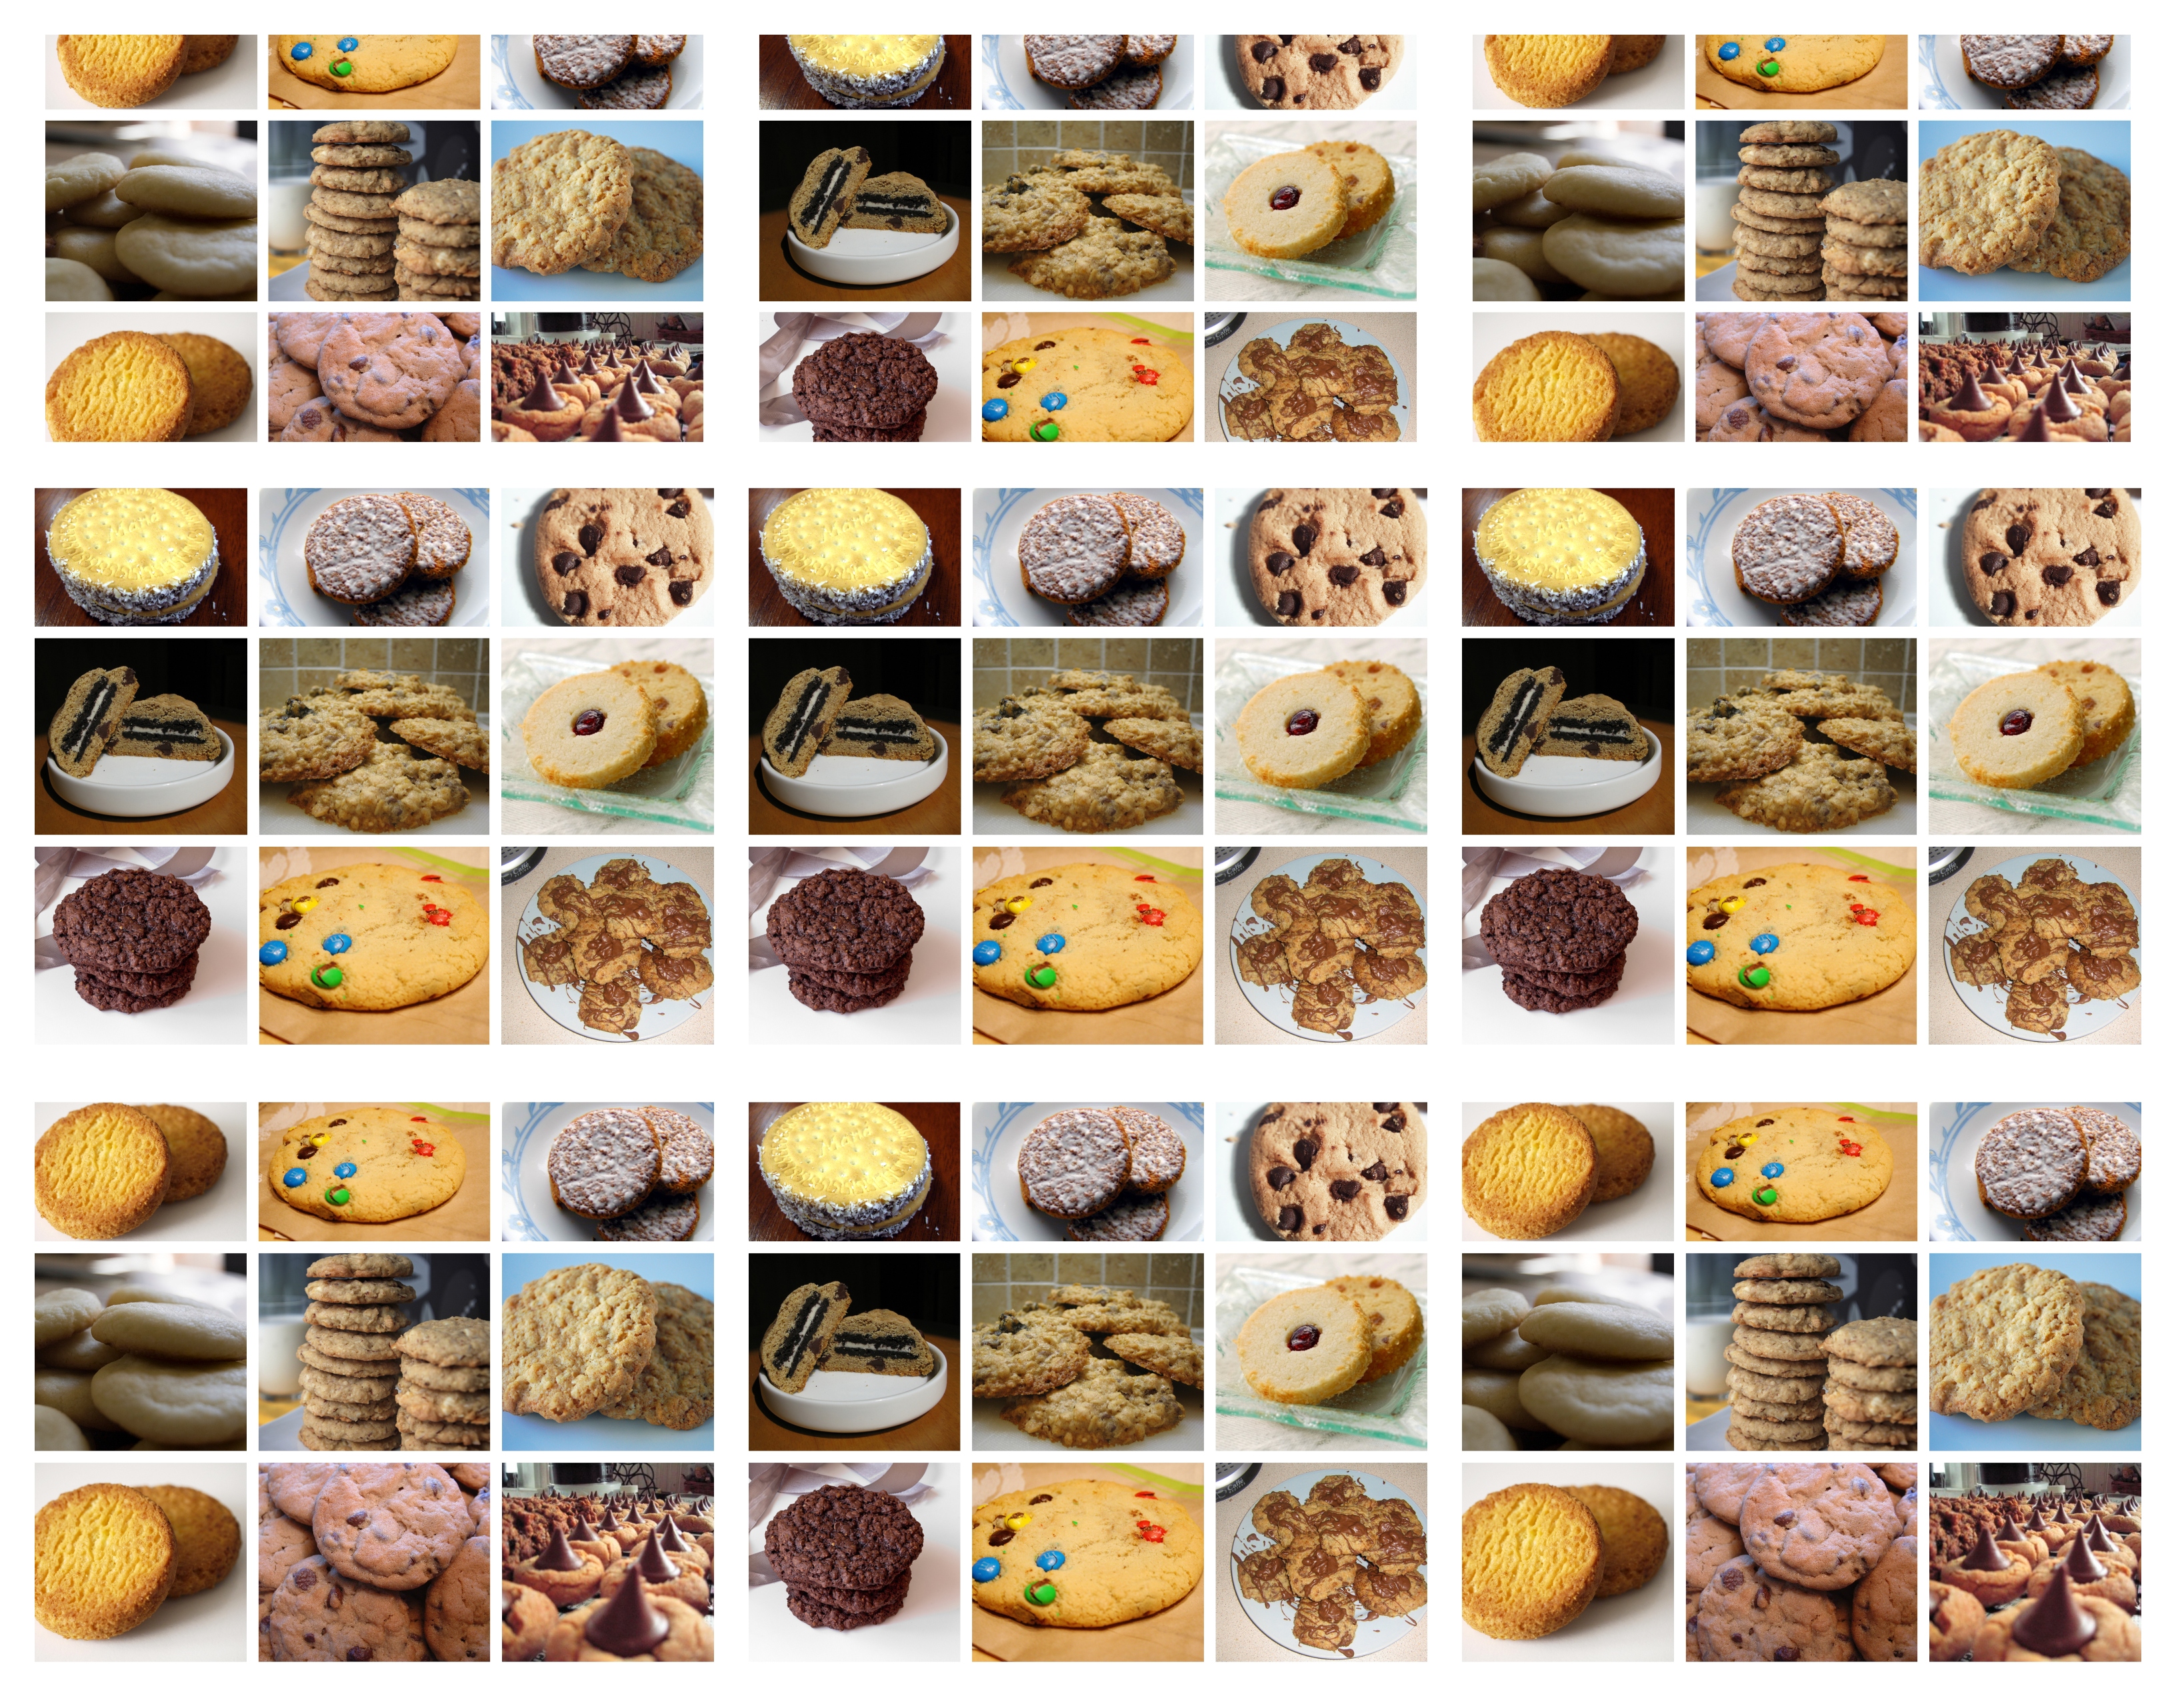 Granny's Cookie Selection